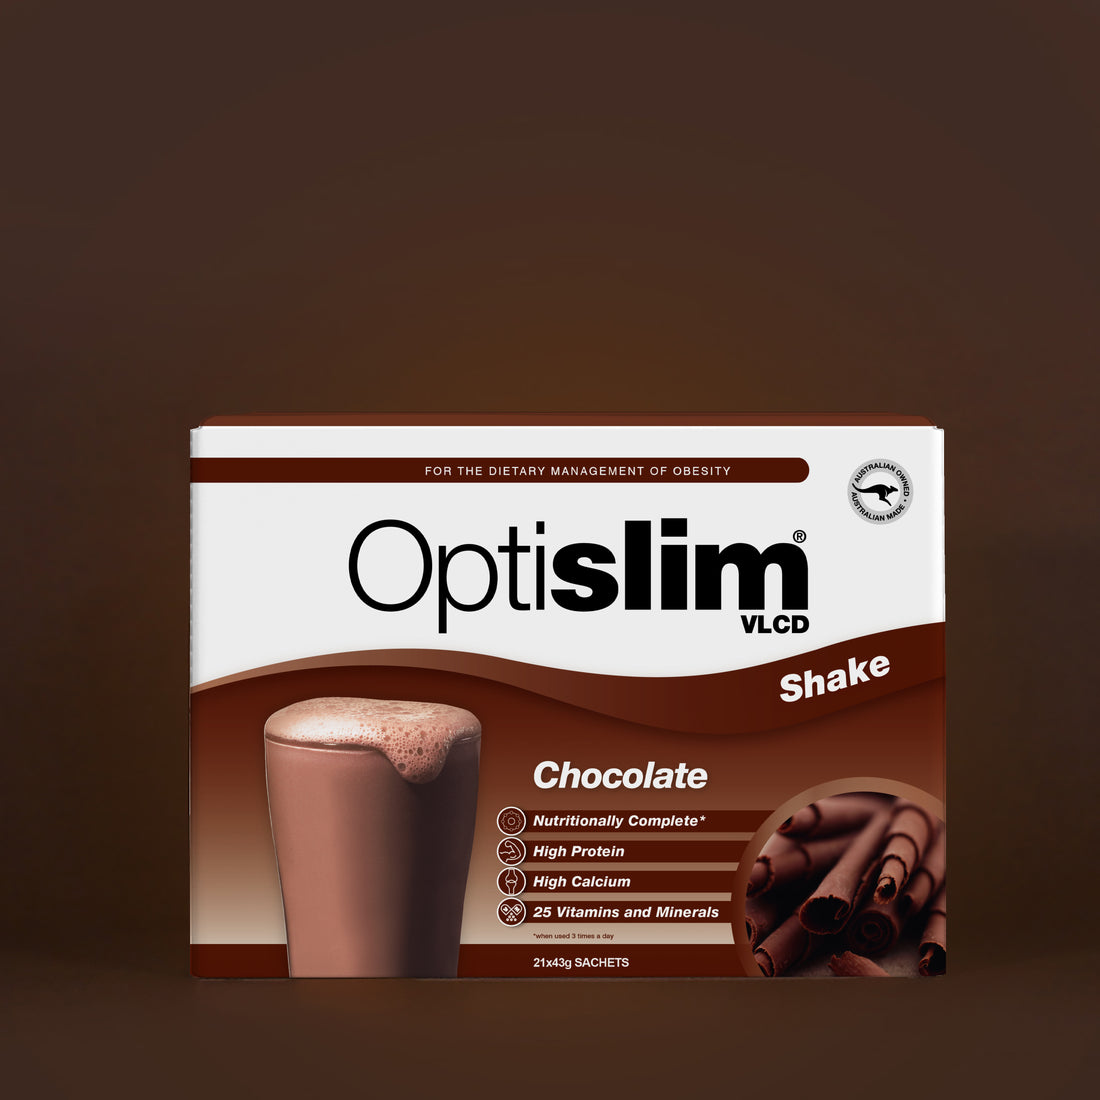 VLCD Meal Replacement Shake Chocolate